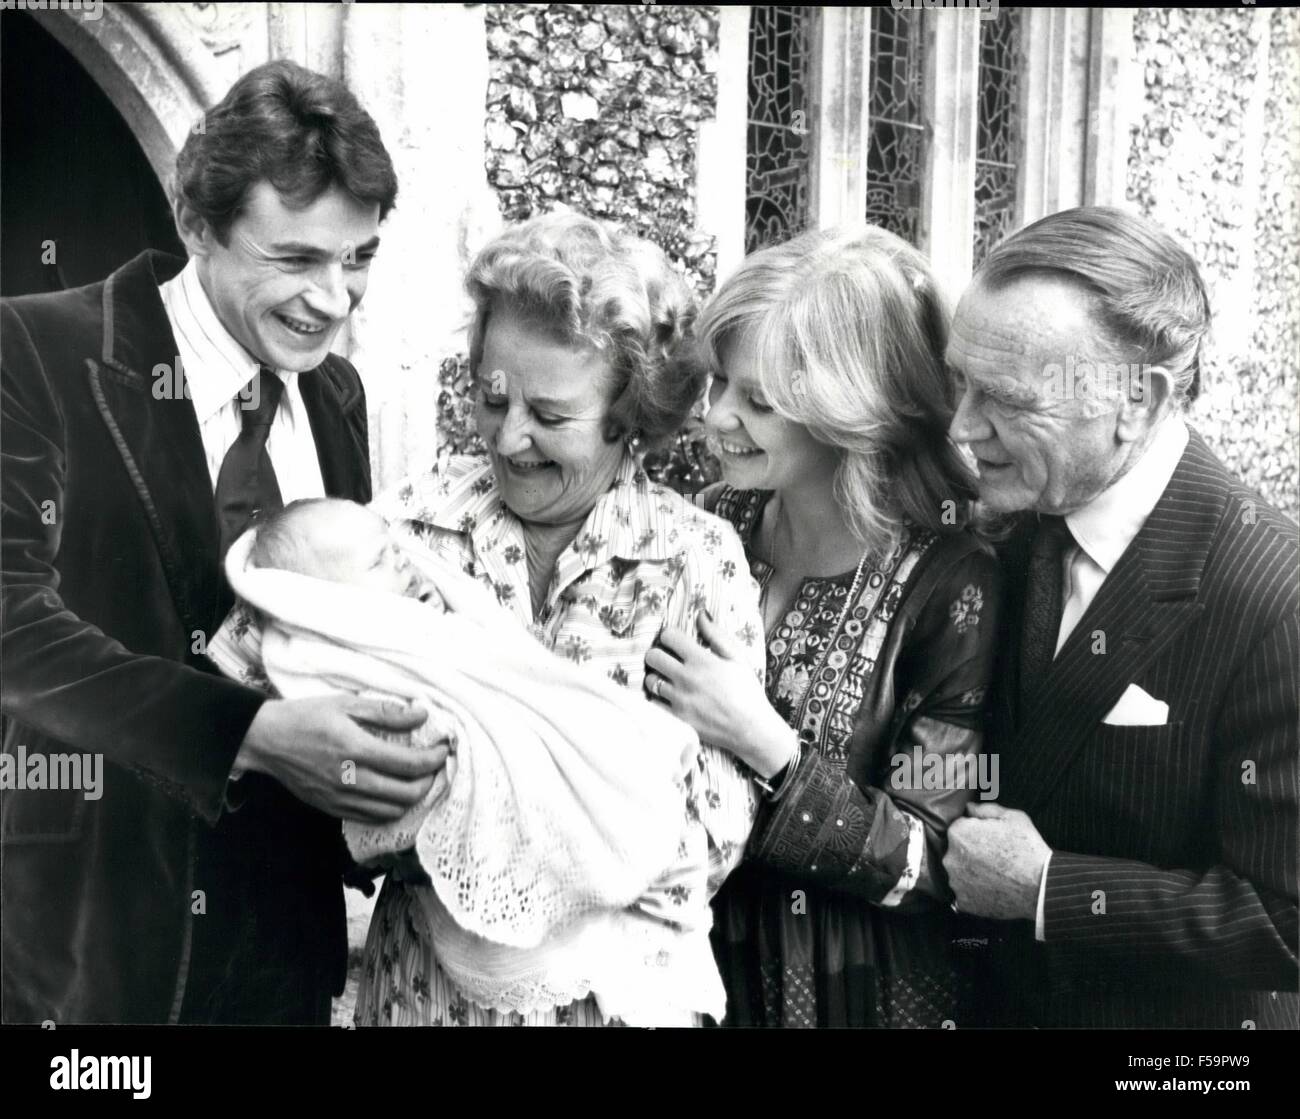 1972 - Hayley Mills's Month Old Love Baby Jason Is Christened Actress Hayley Mill's month old Love Baby Jason was christened at the Parish Church, Denham, Bucks. Where she was herself christened 30 years ago. Hayley Mills is married to film producer Roy Boulting, but they are parted. Jason's father is actor Leigh Lawson, they have no plans to marry. Photo Shows:- Seen after the Christening at the Paris Church Denham L-R Leigh Lawson, father of the baby, Mary Hayley Bell holding Jason, Hayley Mills, and her father John Mills. © Keystone Pictures USA/ZUMAPRESS.com/Alamy Live News Stock Photo